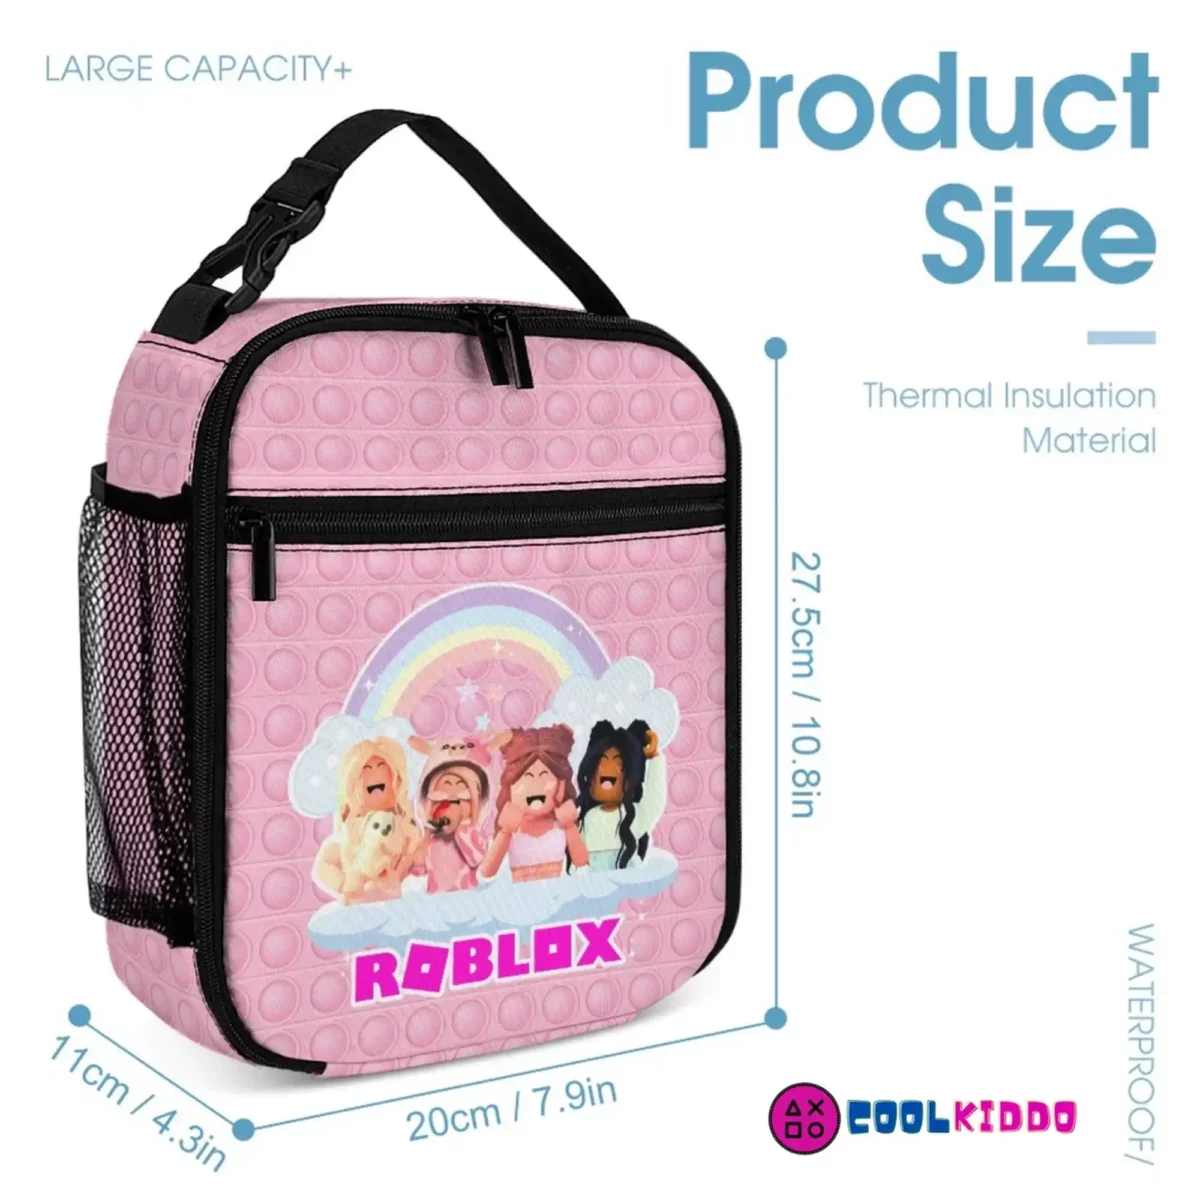 Personalized Roblox Pink Backpack for Girls – Three-Piece Set: Backpack, Lunch Bag, and Pencil Case Cool Kiddo 14